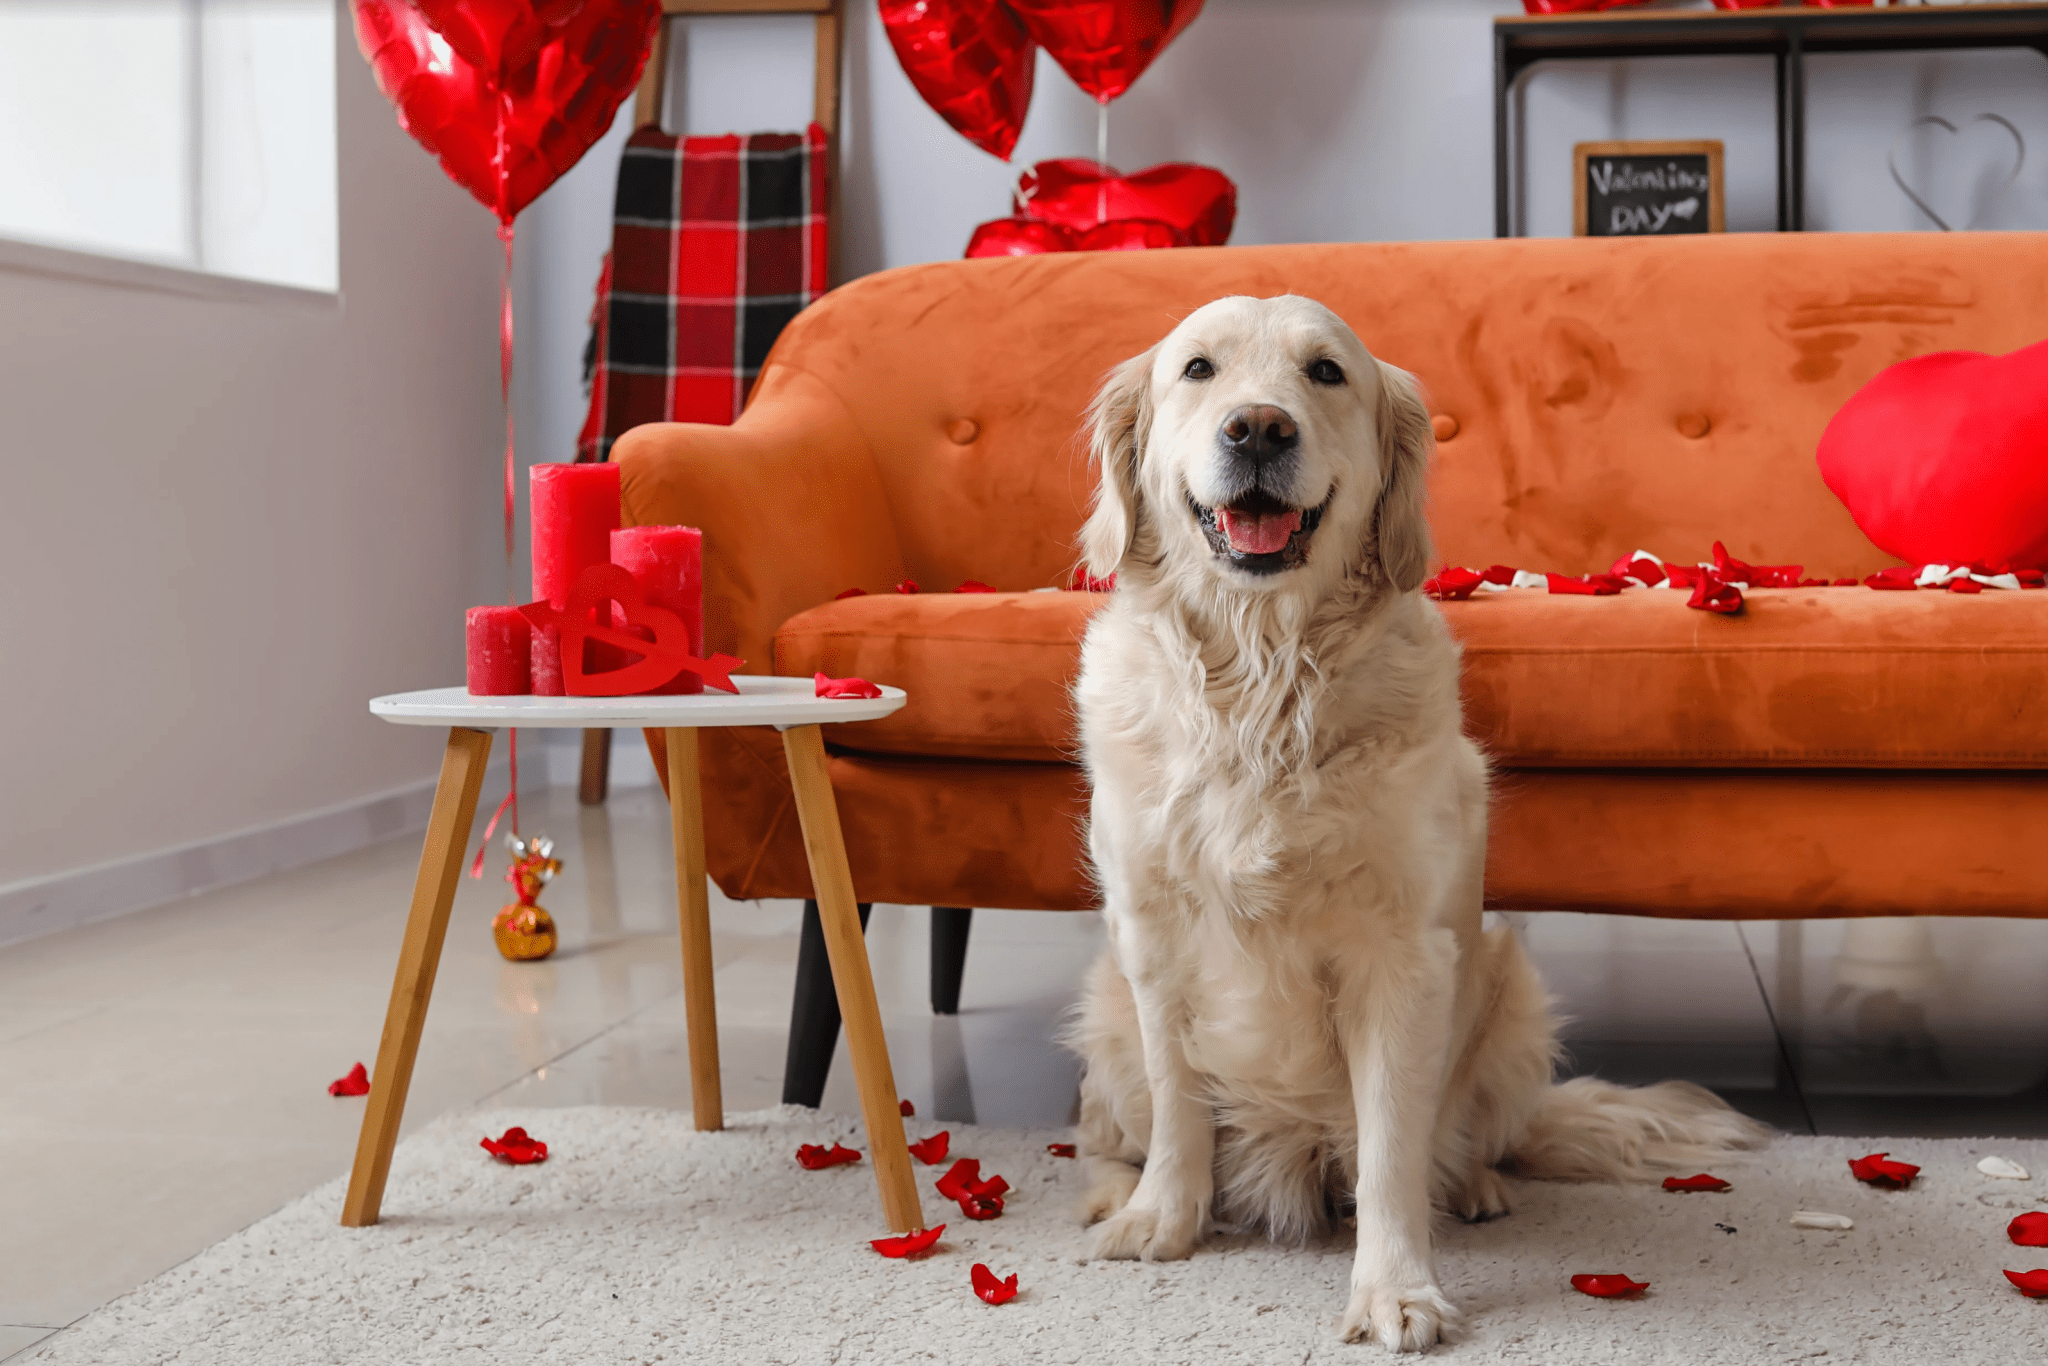 6 Delightful Ideas for Doggy Date Night